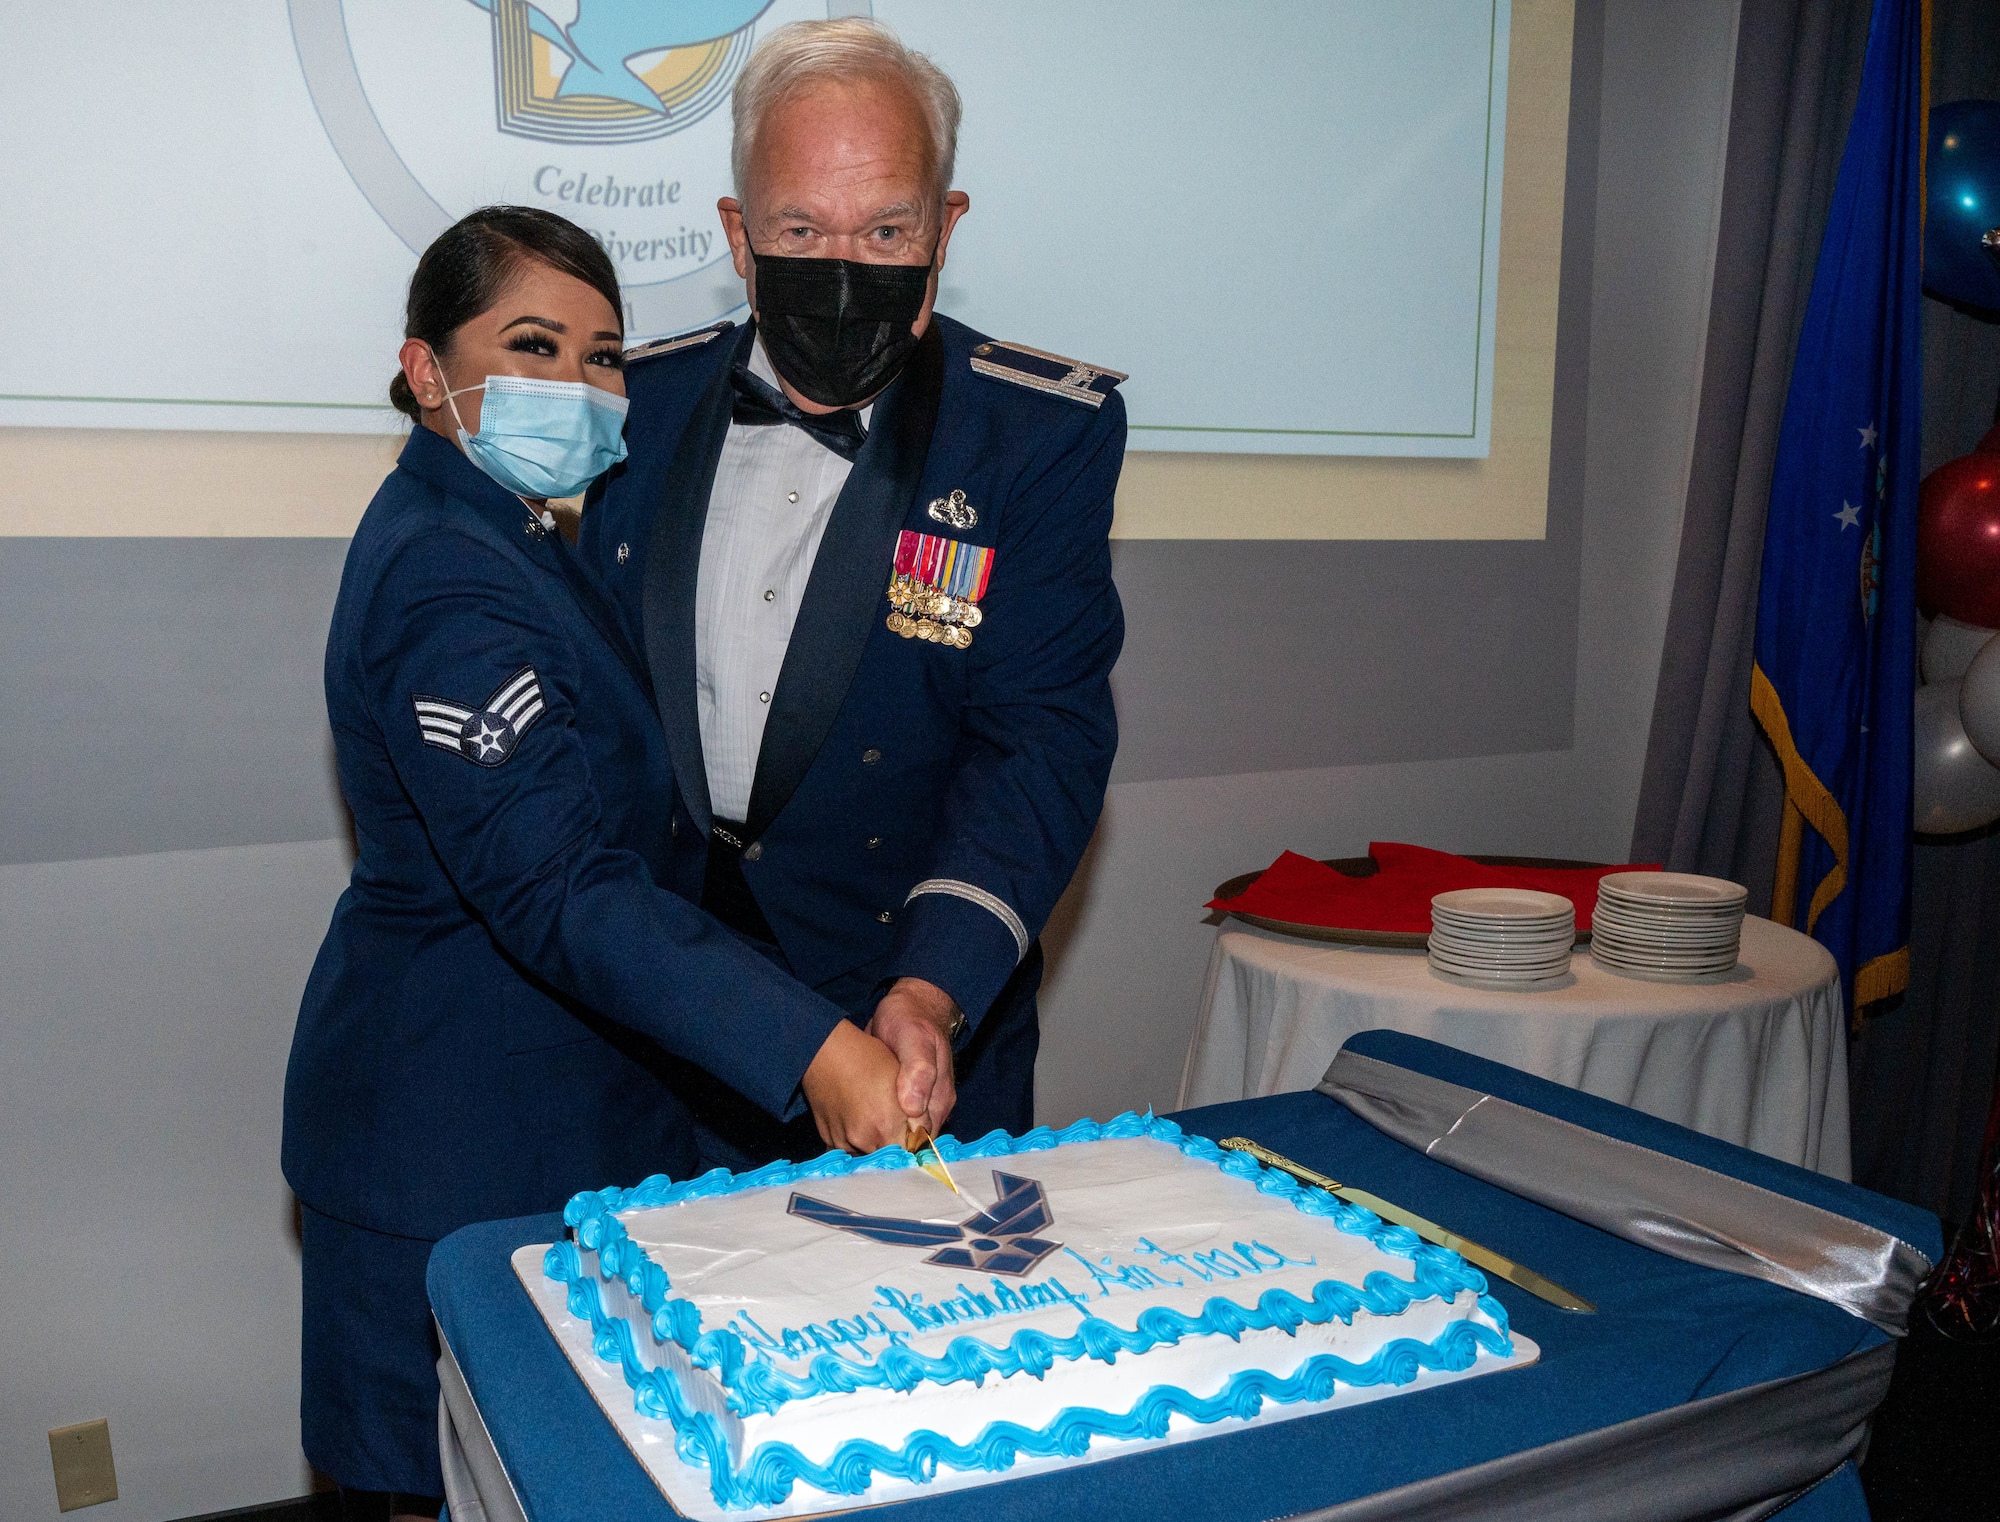 Senior Airman Chanelle Cabanayan, 436th Aerial Port Squadron administrative journeyman and retired Col. James Weber cut the Air Force’s 74th birthday cake at Dover Air Force Base, Delaware, Sept. 18, 2021. Traditionally, the youngest and oldest Airmen at the Air Force Ball cut the cake to celebrate the Air Force birthday. (U.S. Air Force photo by Senior Airman Faith Schaefer)